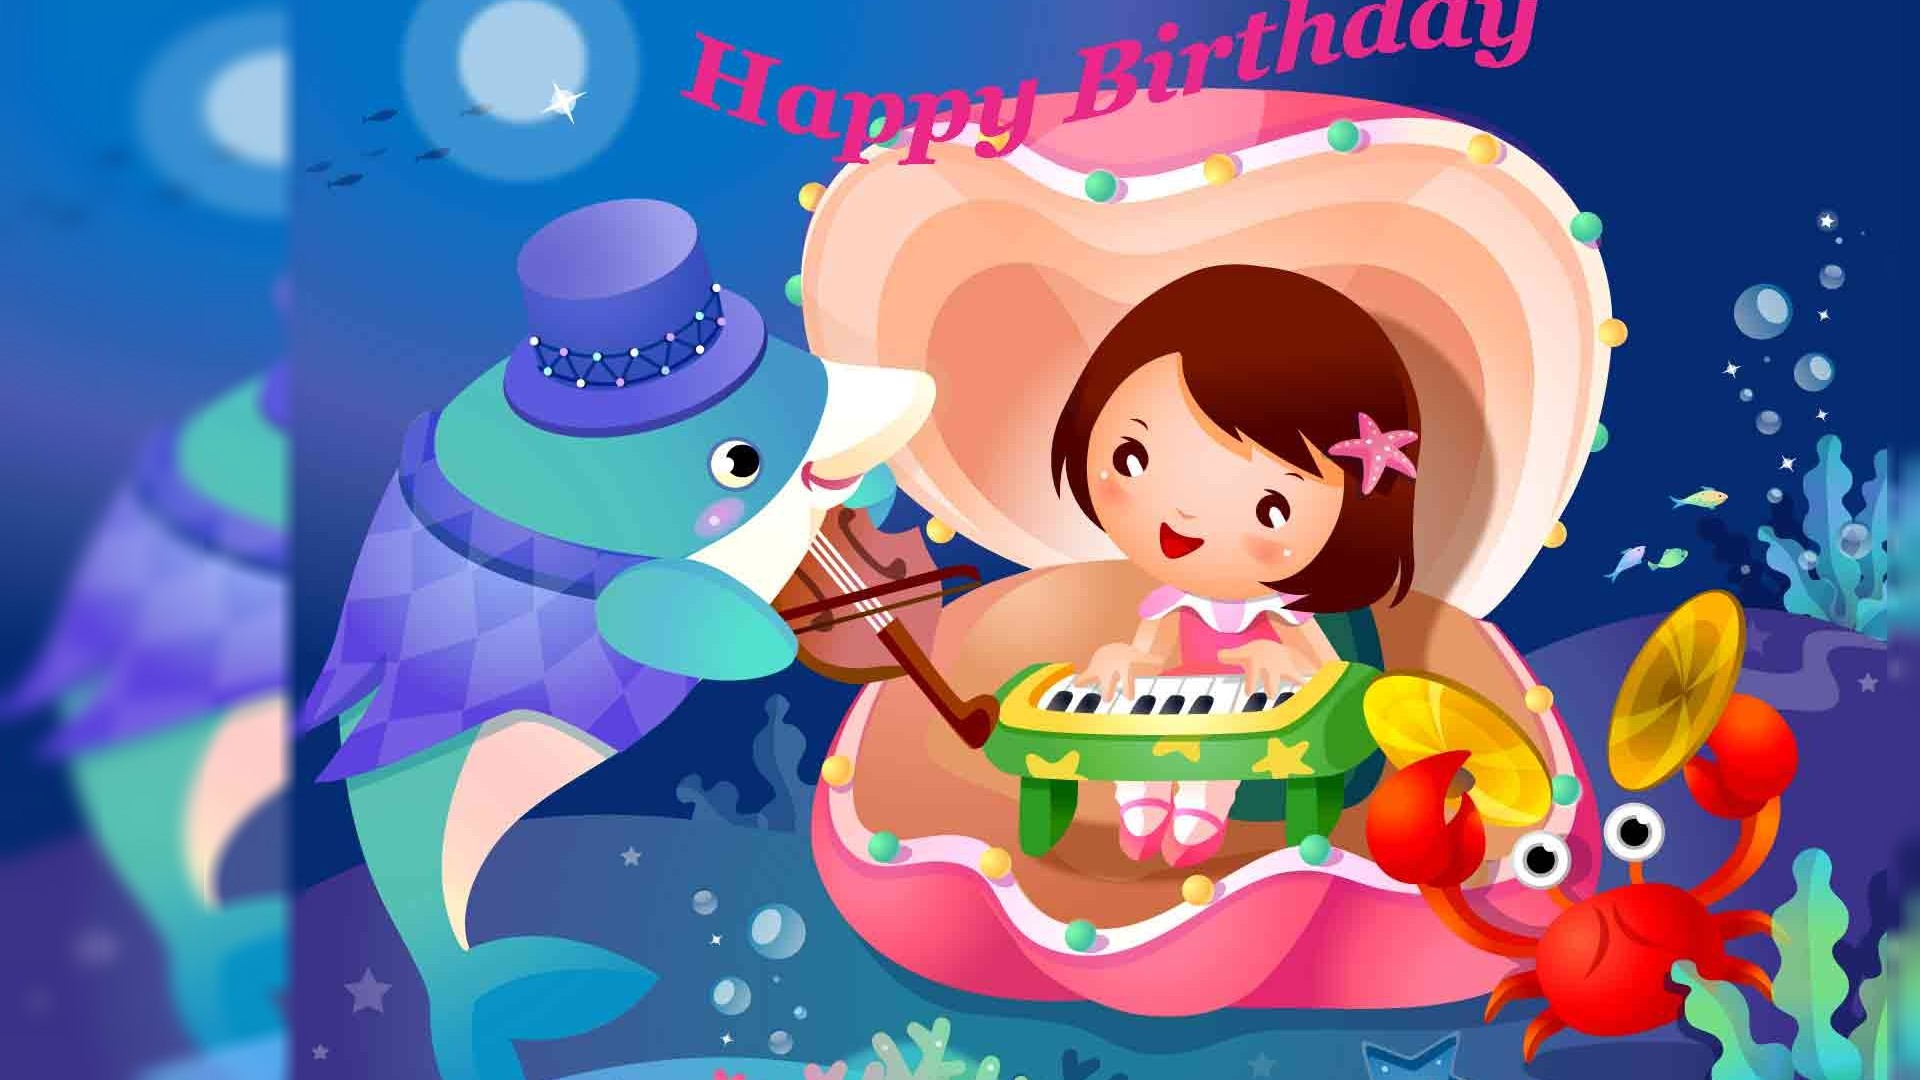 1920x1080 Cute animated happy birthday HD wallpapers free download